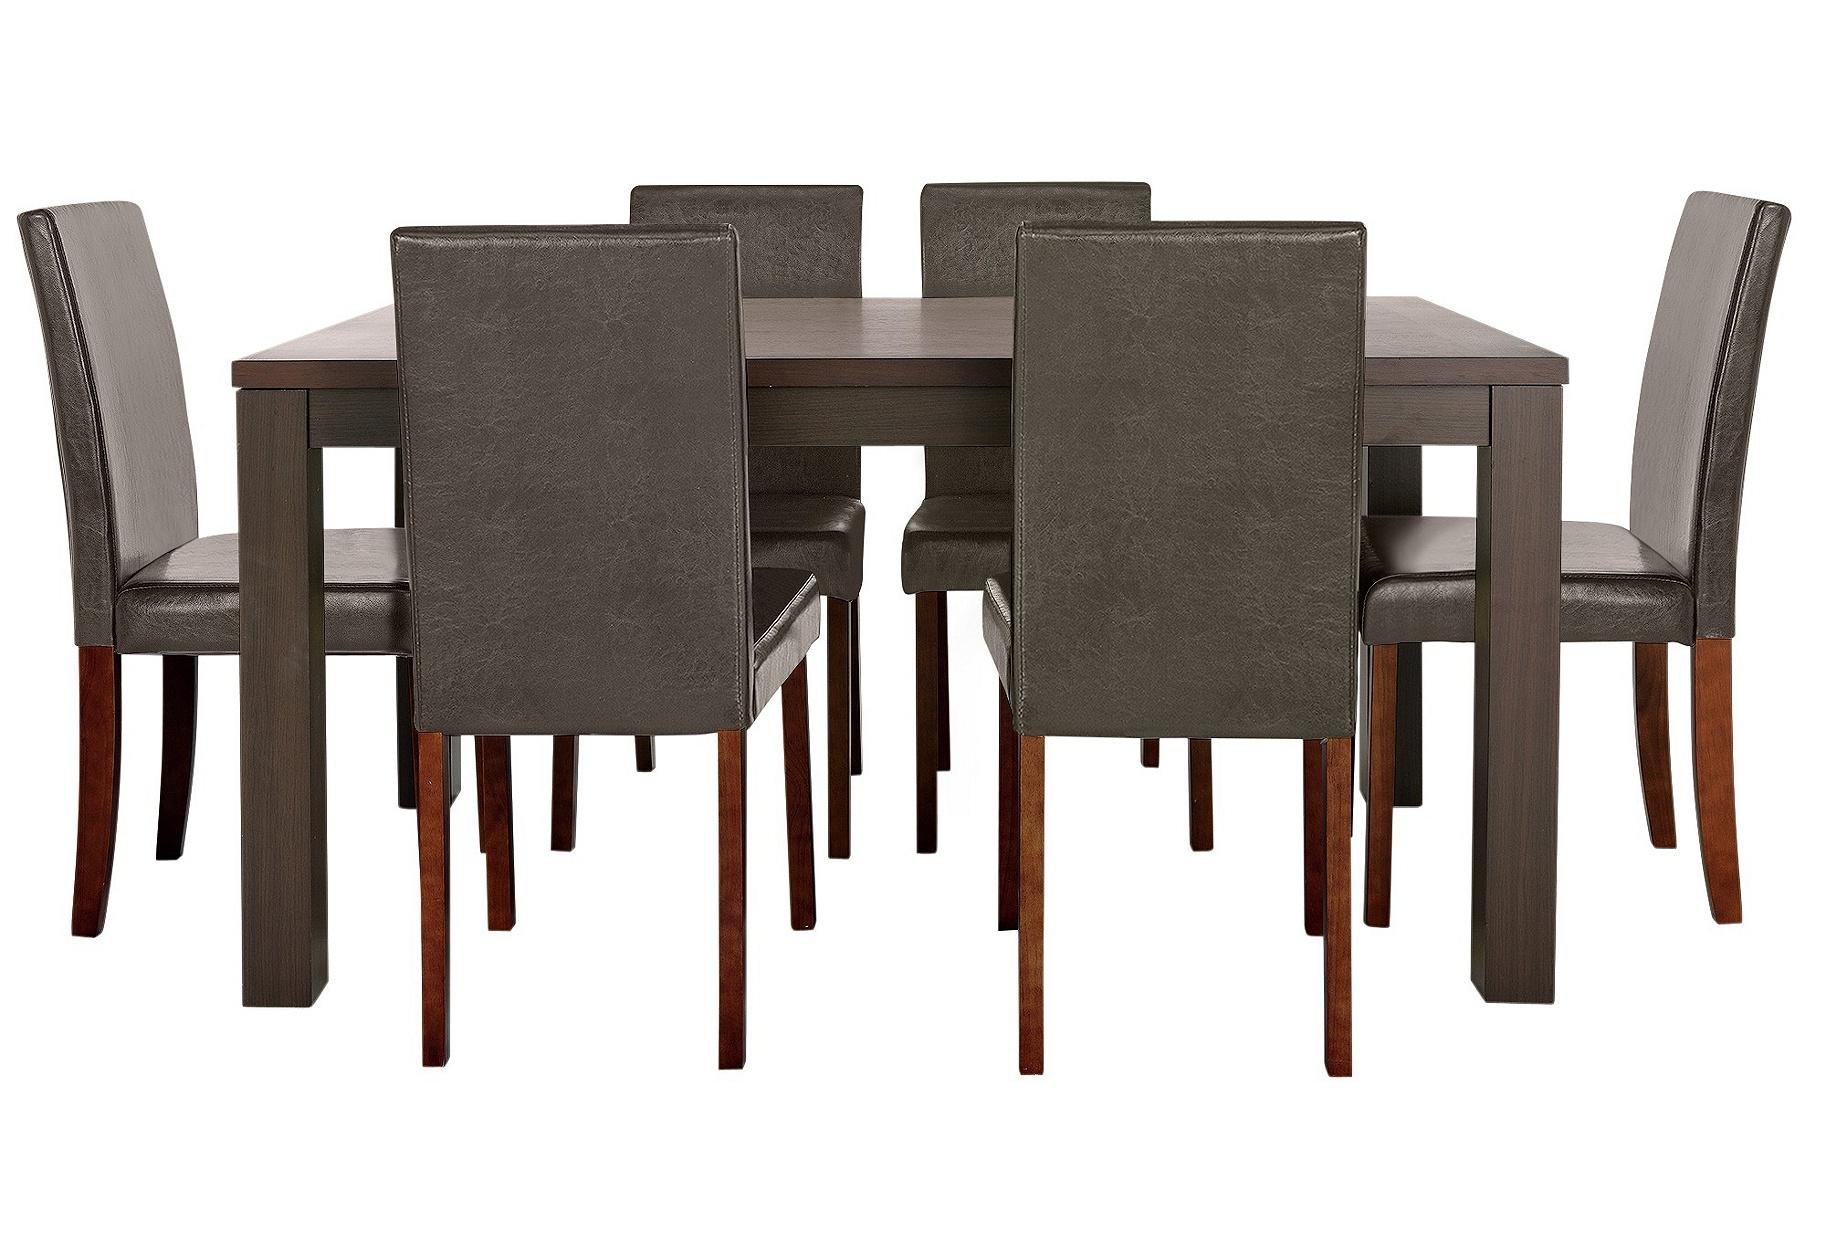 Buy Dining tables and chairs at Argos.co.uk - Your Online Shop for Home